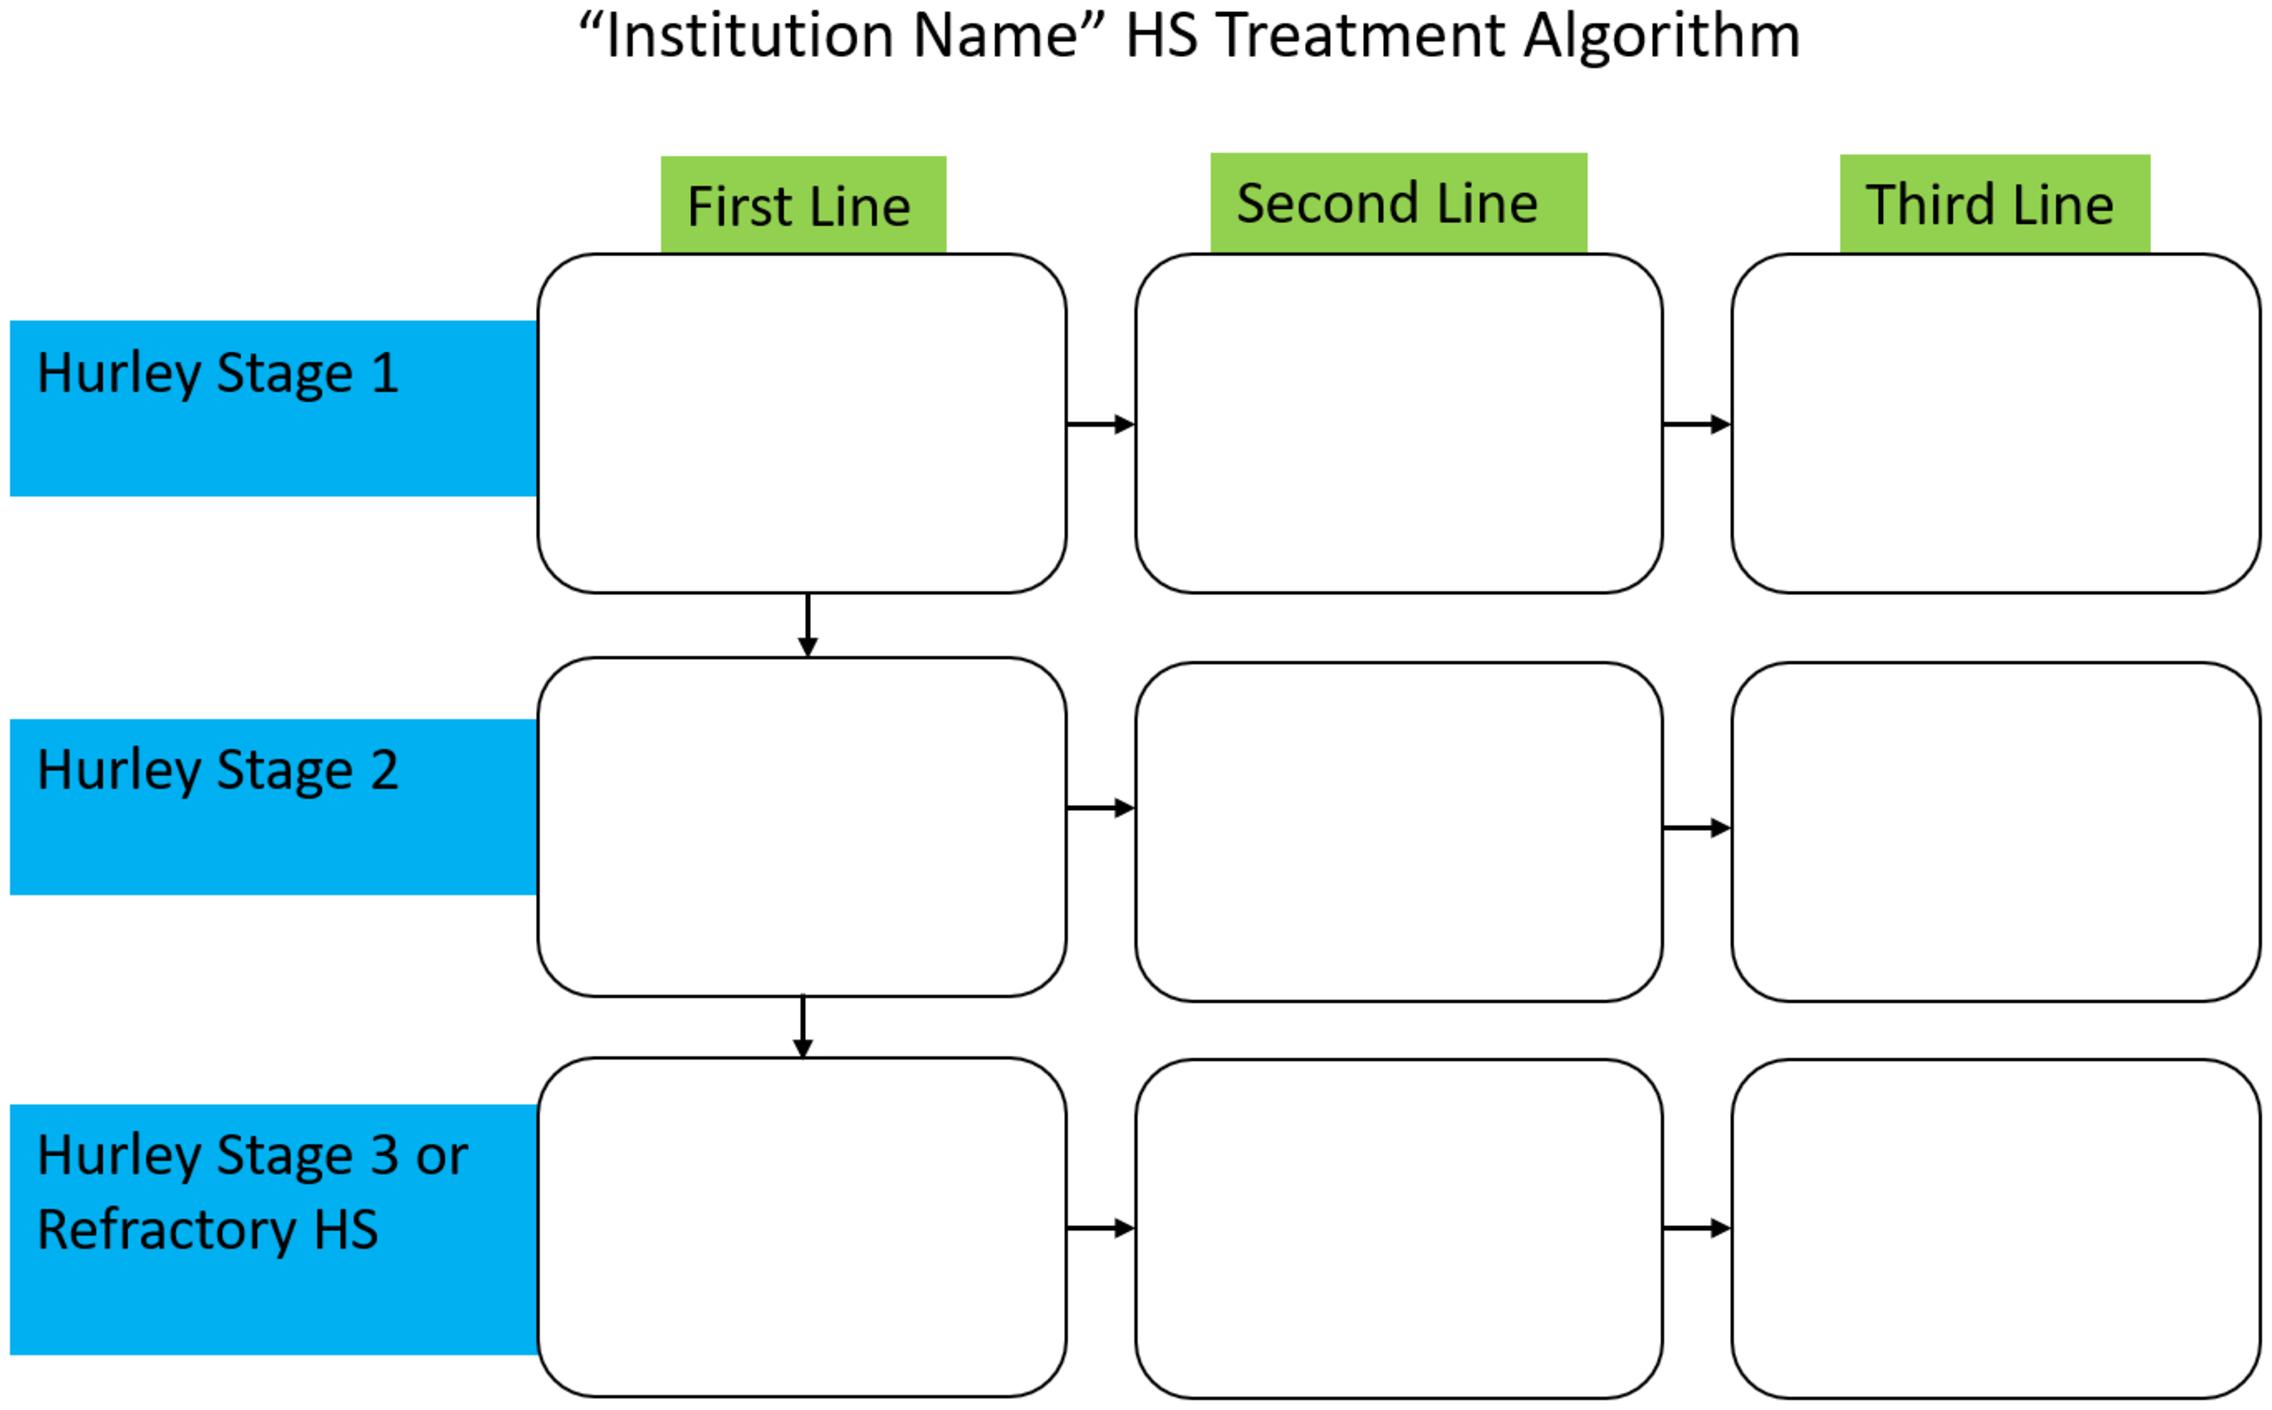 Fig. 32.1, Example of a Blank Institution-specific Hidradenitis Suppurativa (HS) Algorithm Structure.